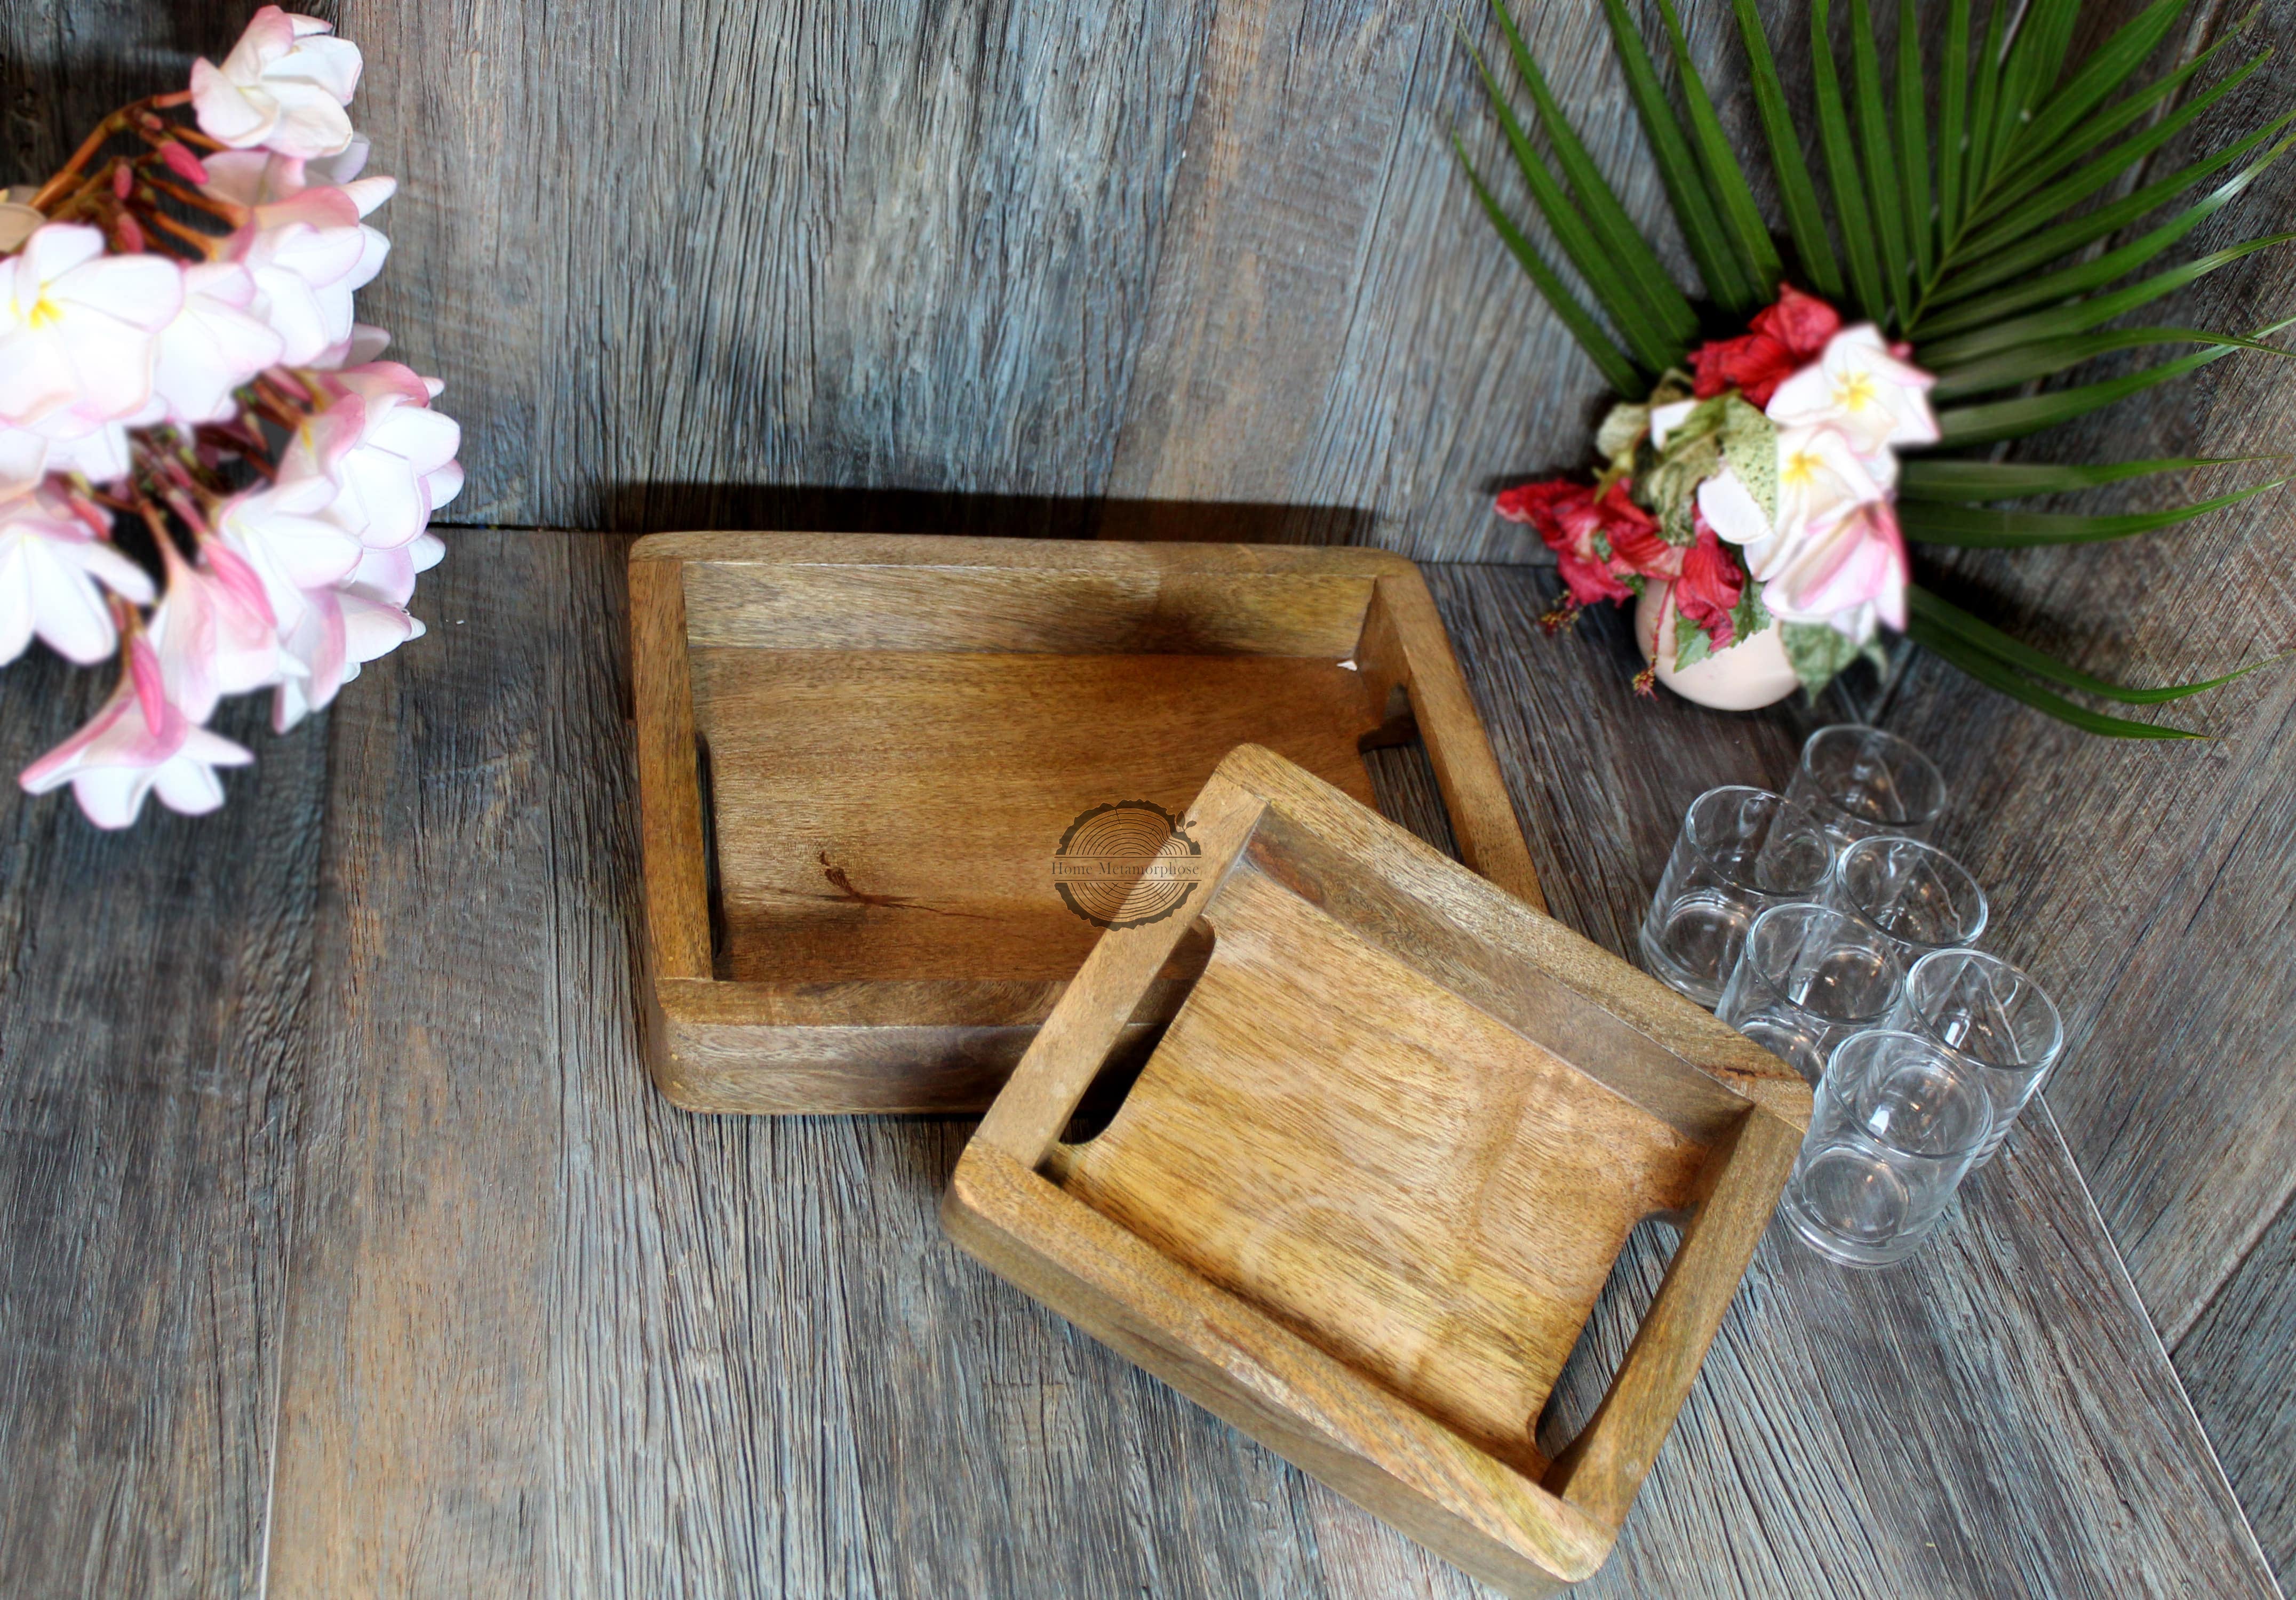 Decorative Ottoman Serving Tray Wooden Rustic (Set of 2), Rustic Brown | Black Sleek Metal Handles | 4 Matching Coasters | Coffee Table Decor | Serving Kitchen Platter | for All Occasions